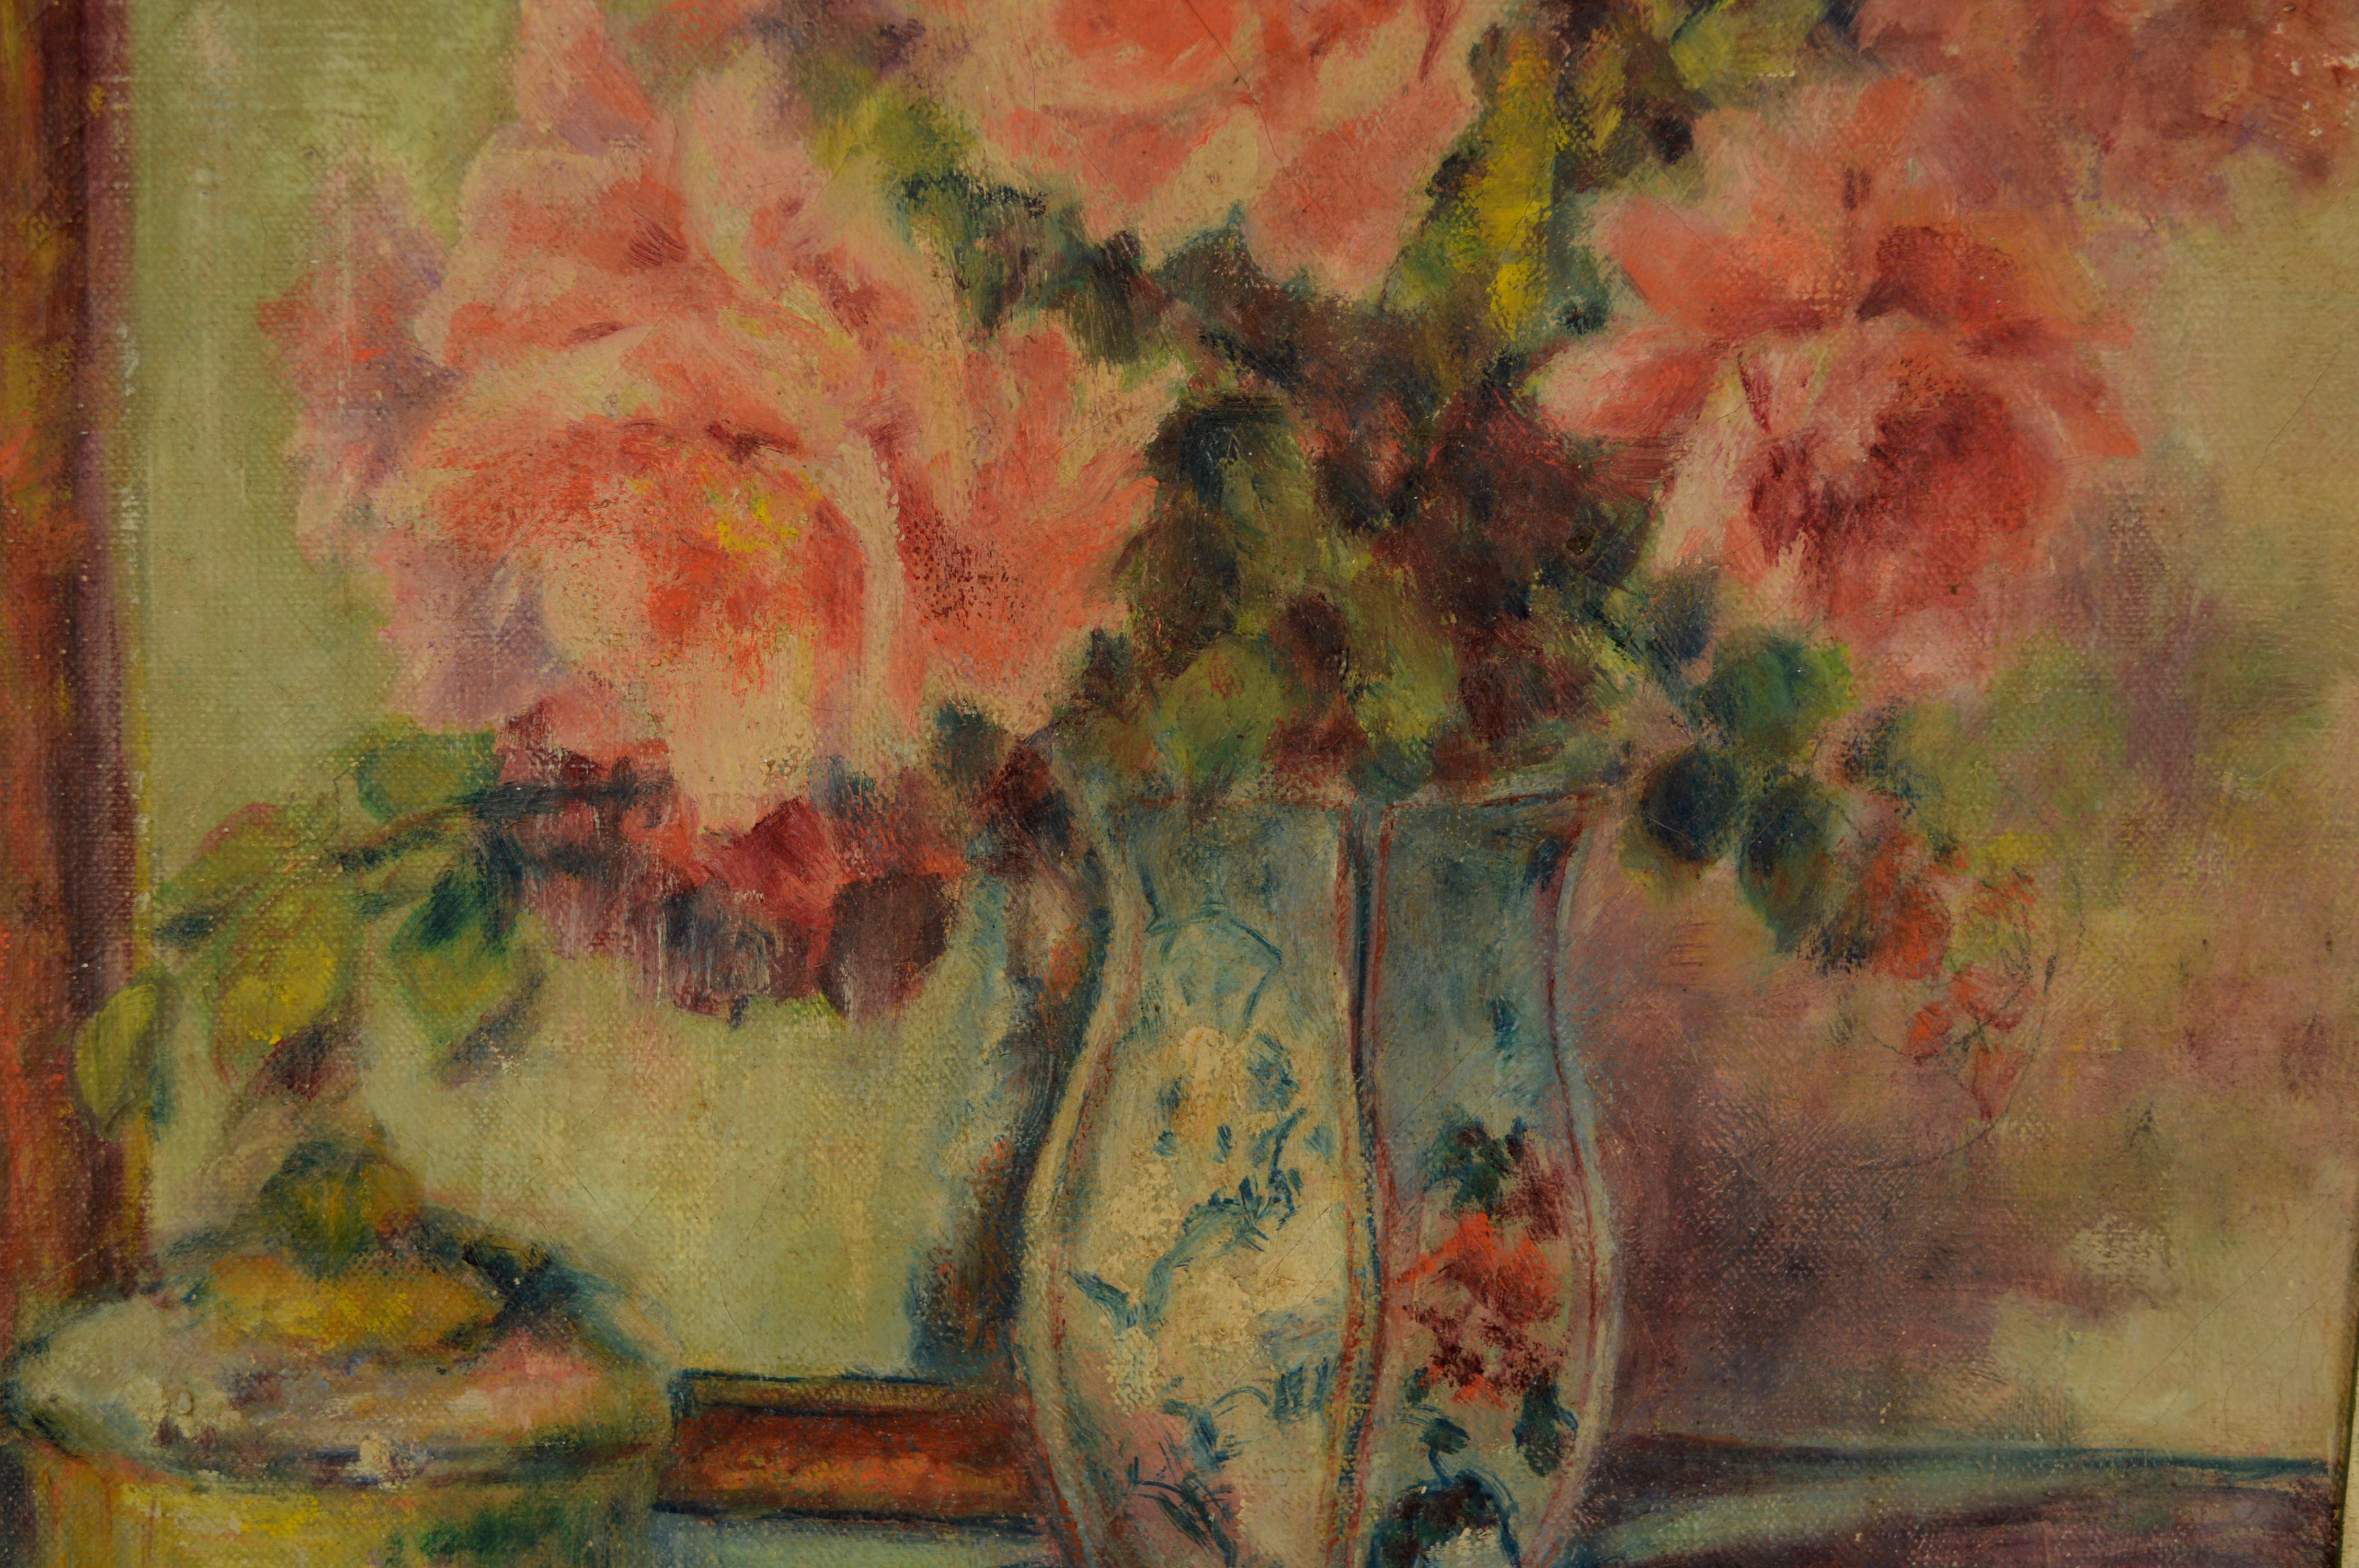 Roses and vase by Bonnie Beach Ryan (American, 1901-1940). In 1933, Bonnie Beach Ryan held her first solo show of flower and still life paintings at the Dana Bartlett Gallery in Los Angeles to favorable notices from critic Arthur Millier of the Los